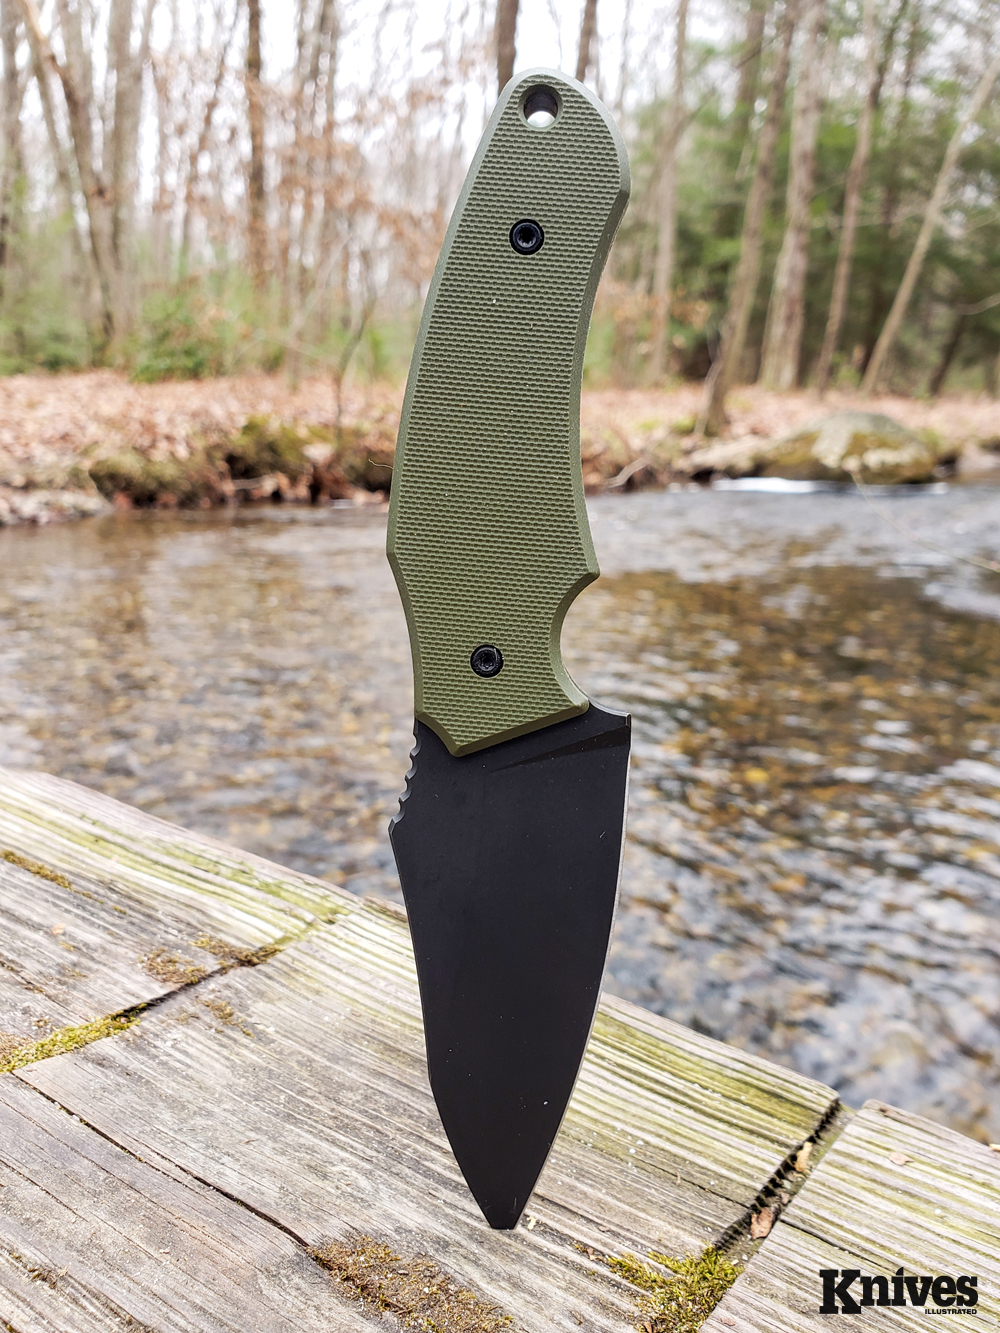 The Hoback Shepherd offers big utility in a small size that’s perfect for EDC.